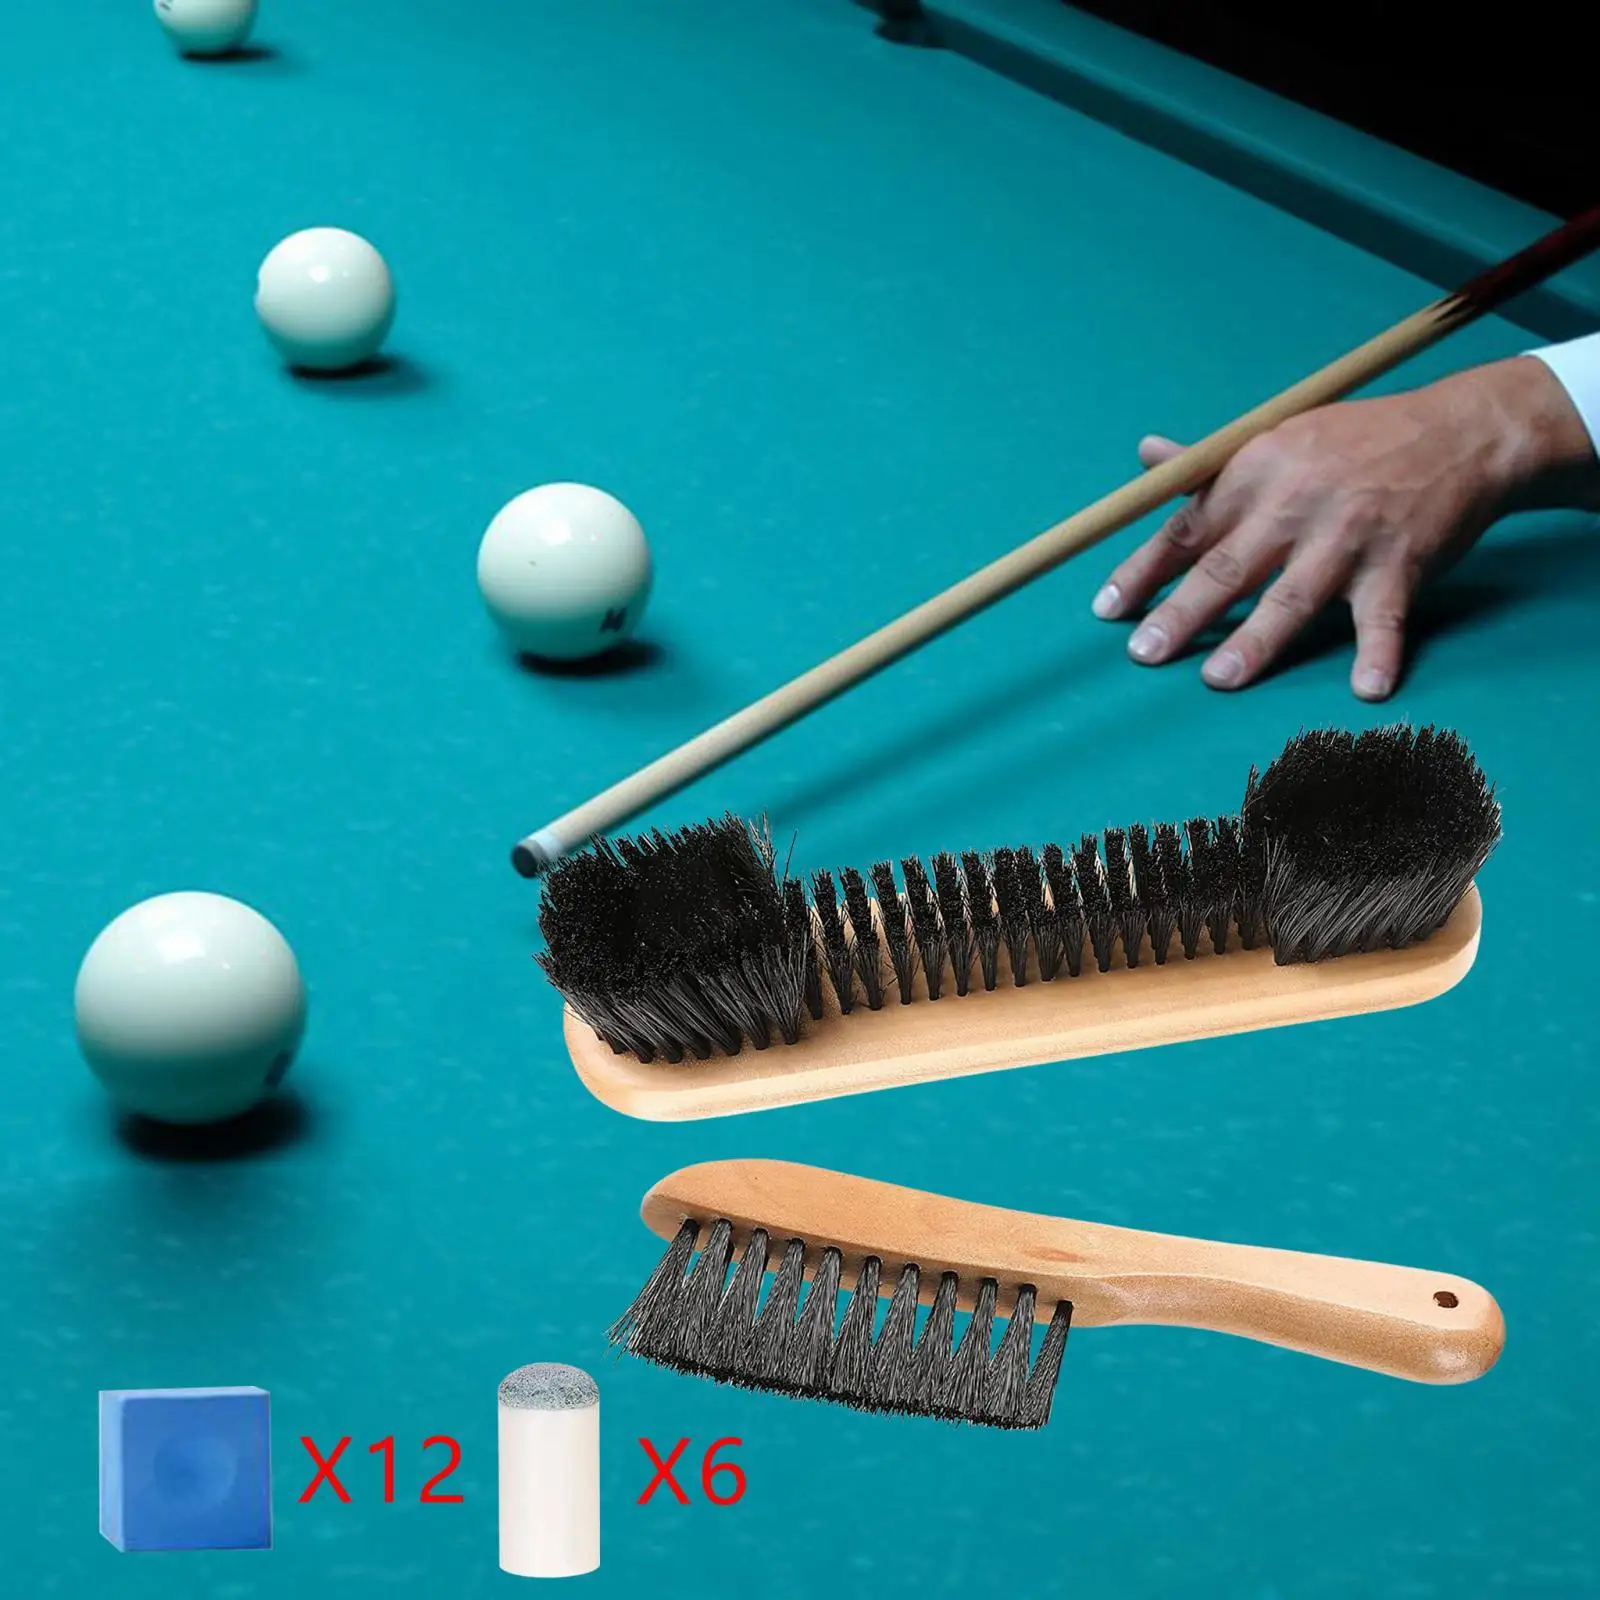 Billiard Table Brush Cleaning Tools Durable Practical Billiards Table Cleaning Tool Billiard Pool Table Brush and Rail Brush Set